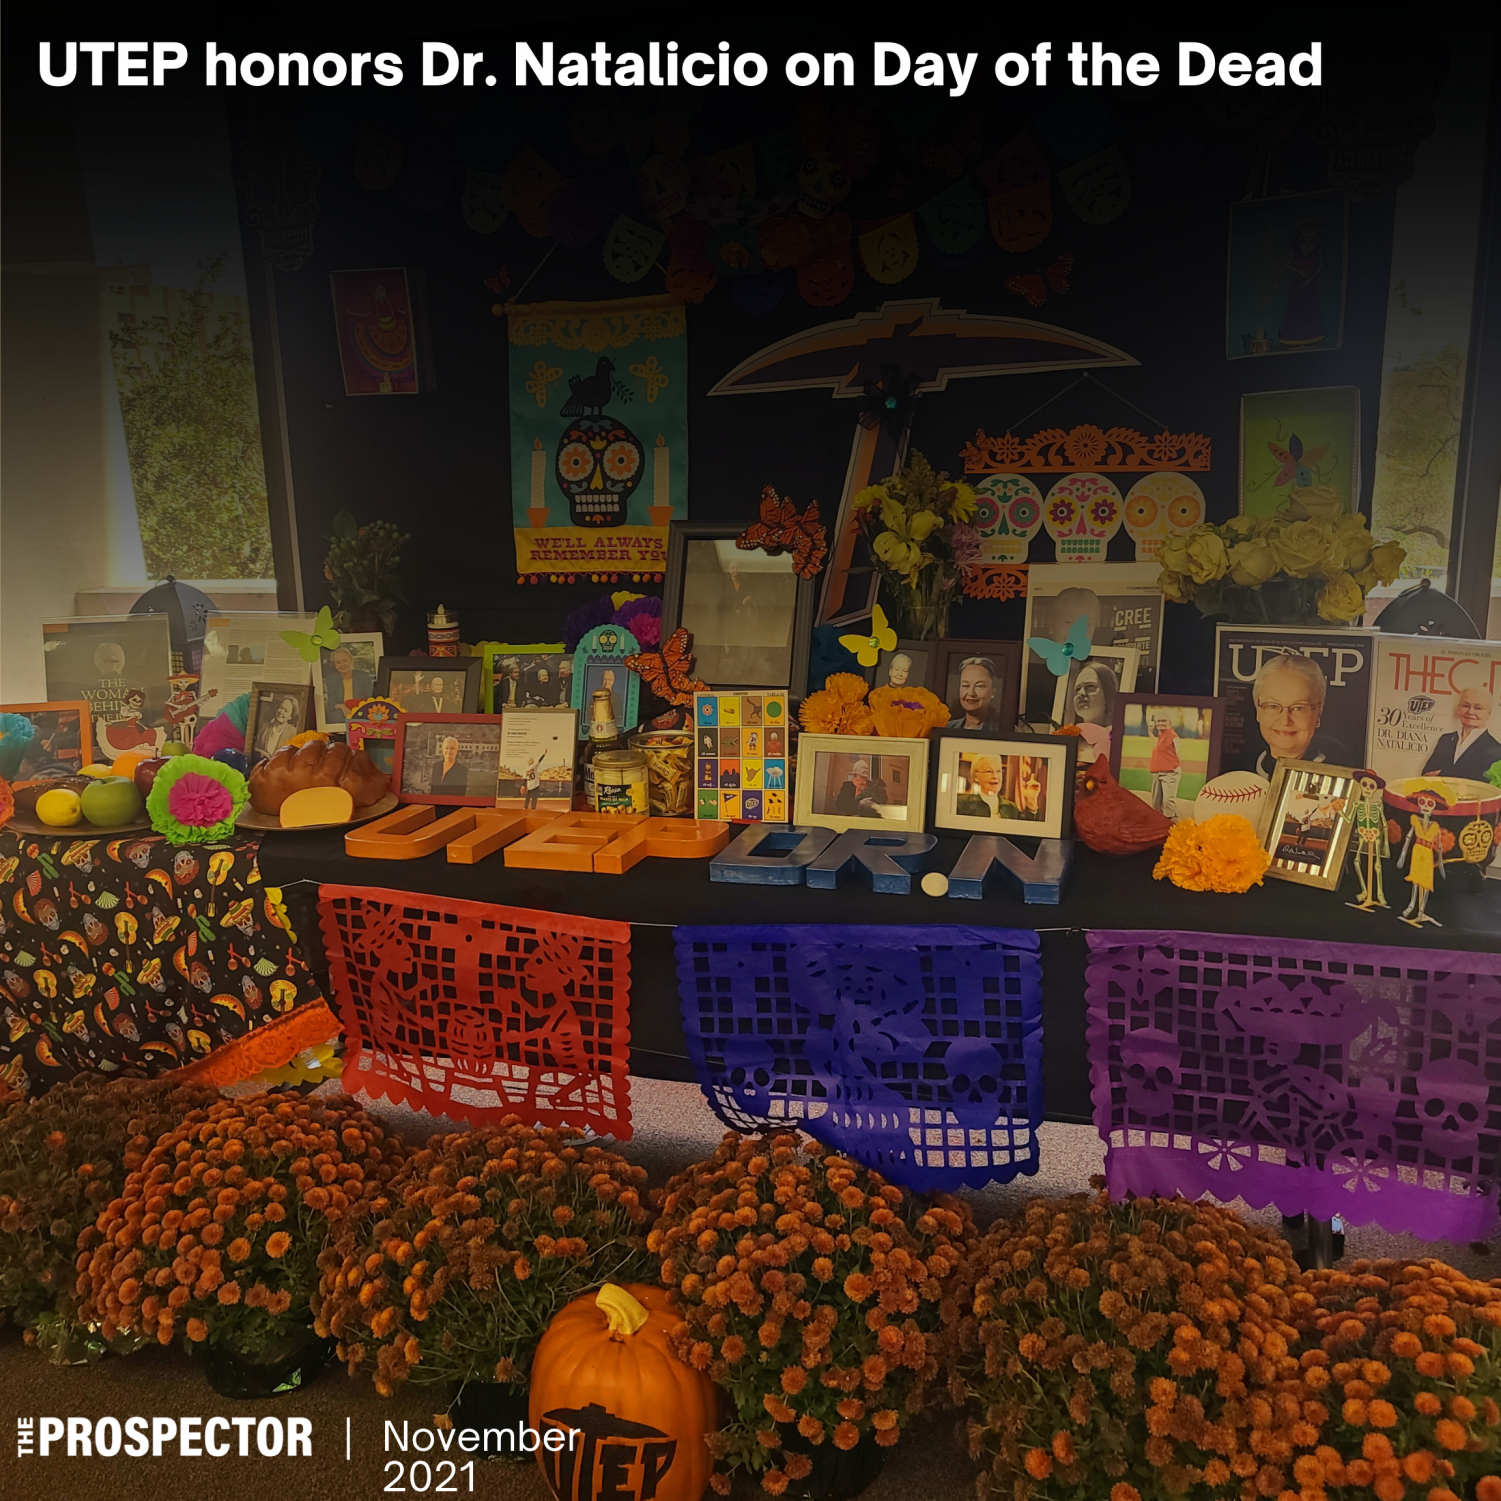 UTEP+honors+Dr.+Natalicio+on+the+Day+of+the+Death